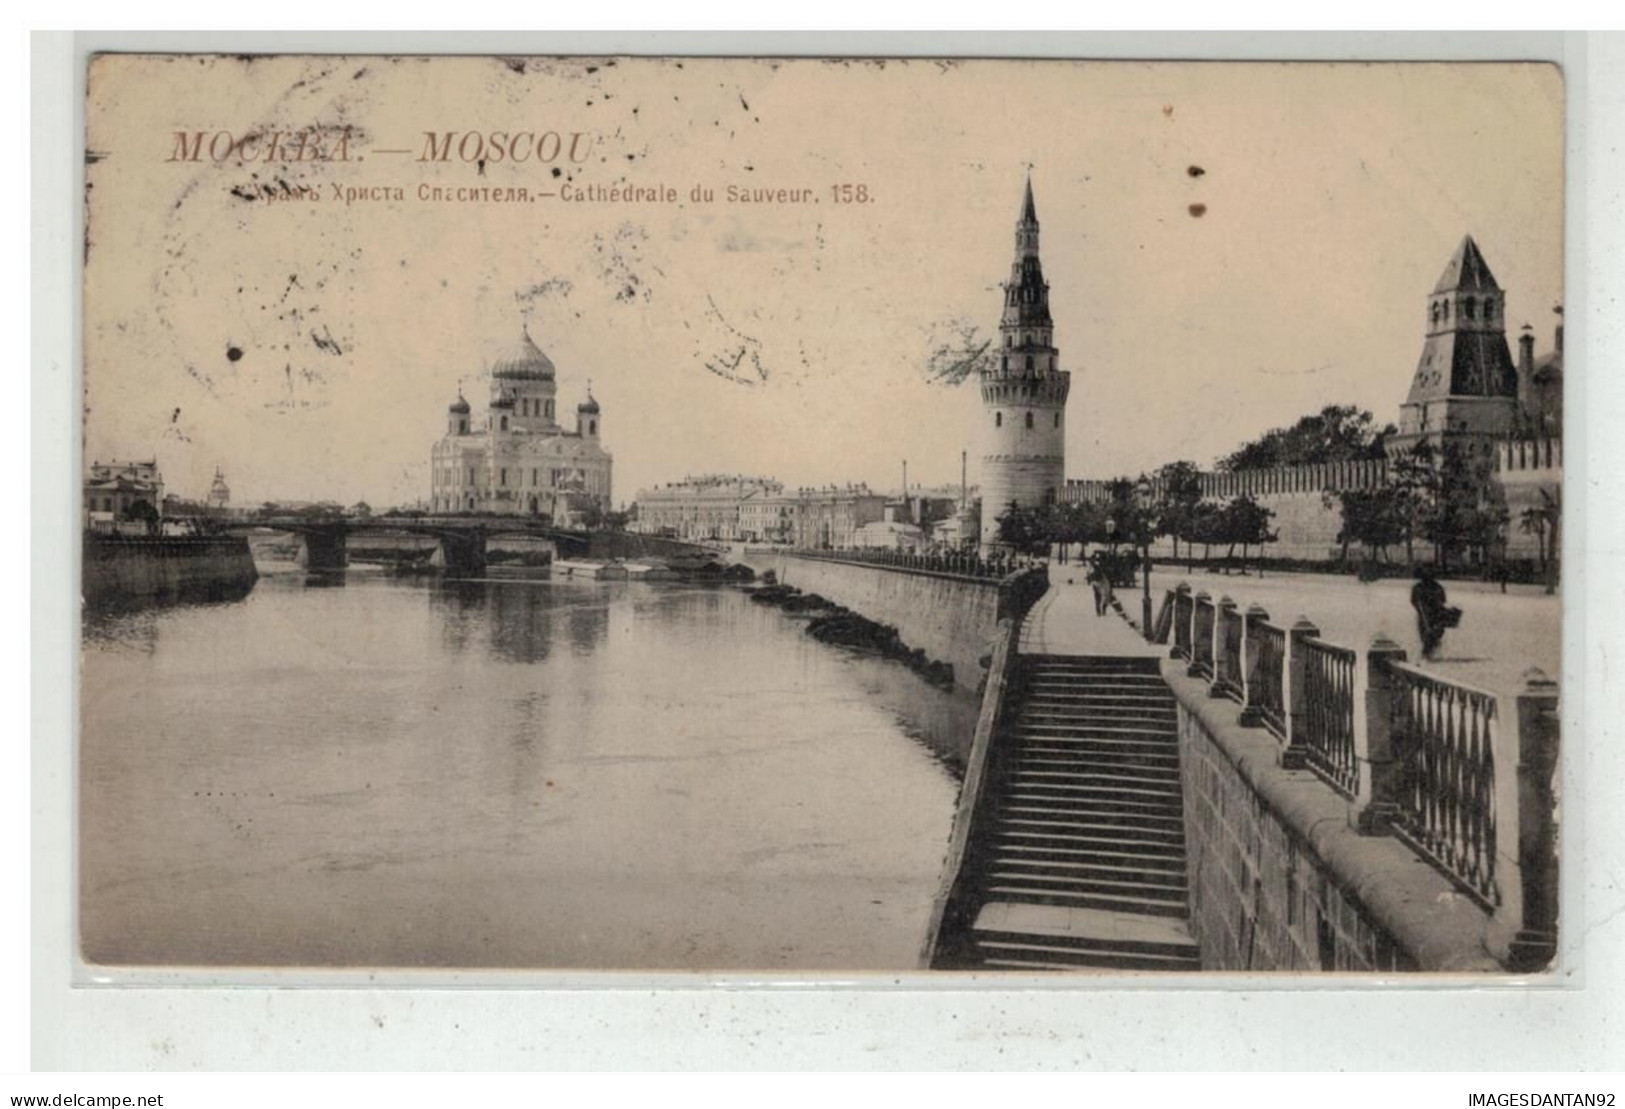 RUSSIE RUSSIA #18946 MOSCOU N°158 CATHEDRALE DU SAUVEUR - Russland